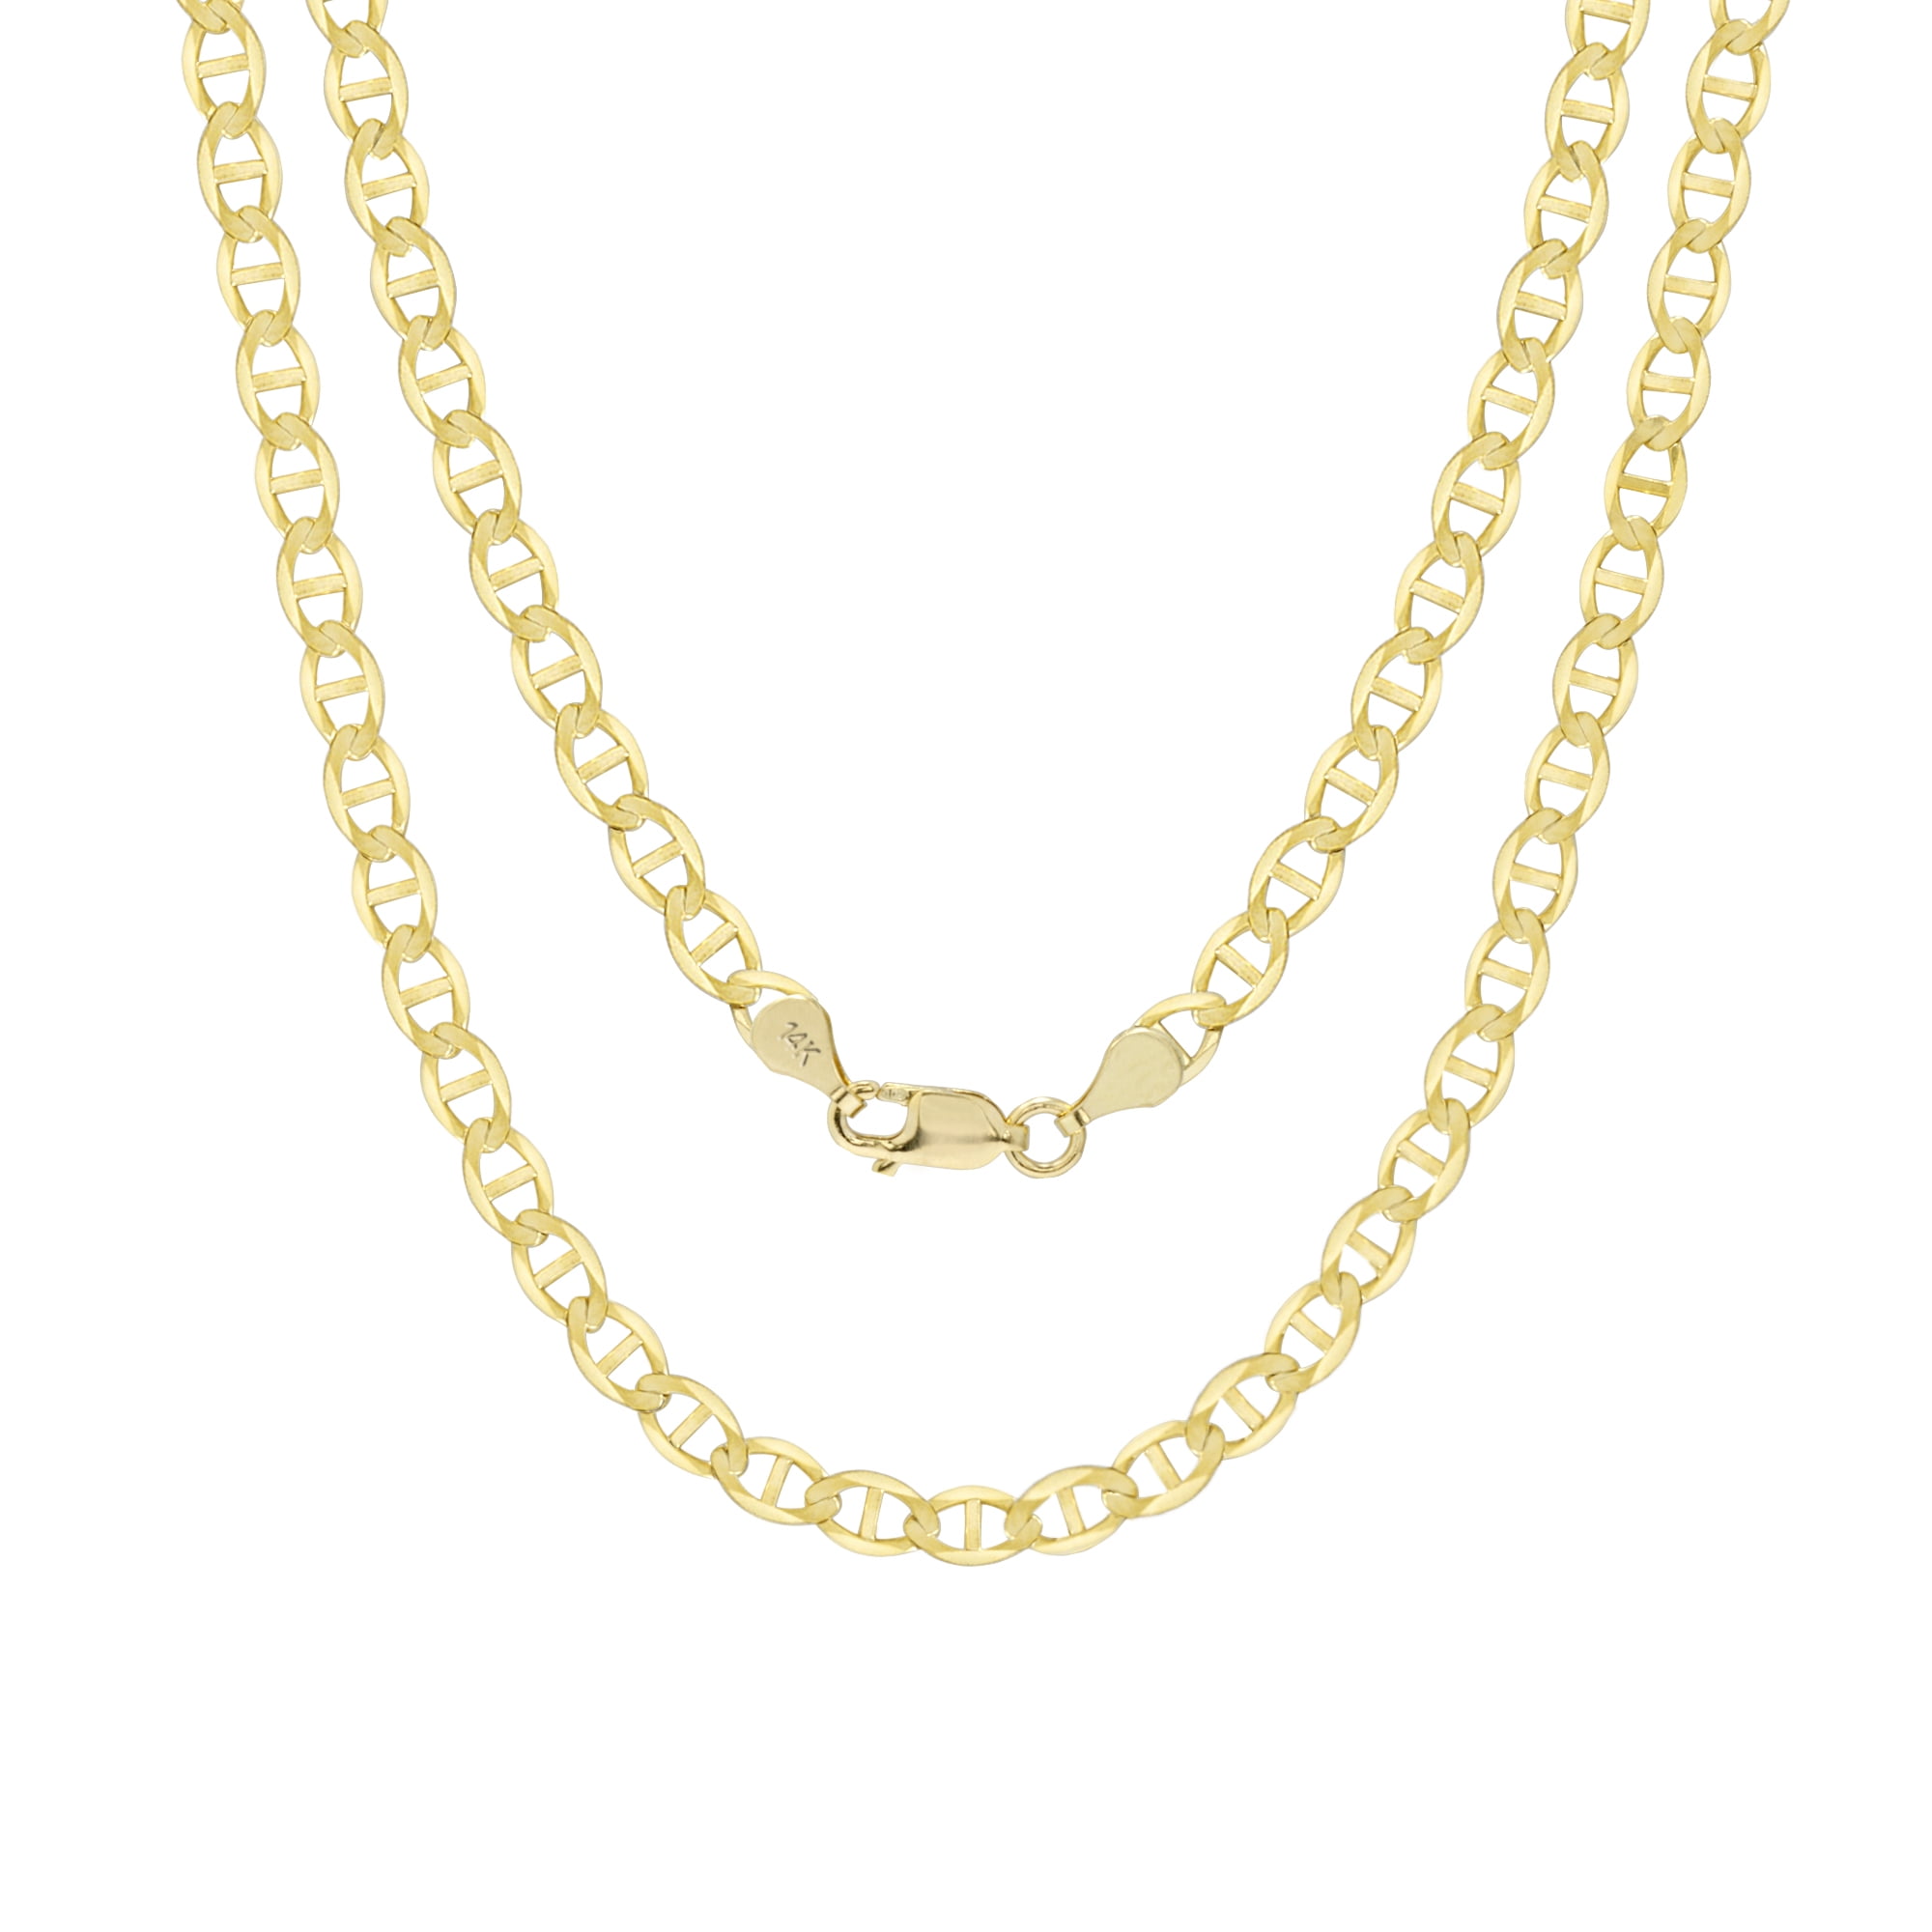 Unisex 14k Solid Yellow Gold 1.5 MM 18" Anchor Mariner Link Chain Necklace 